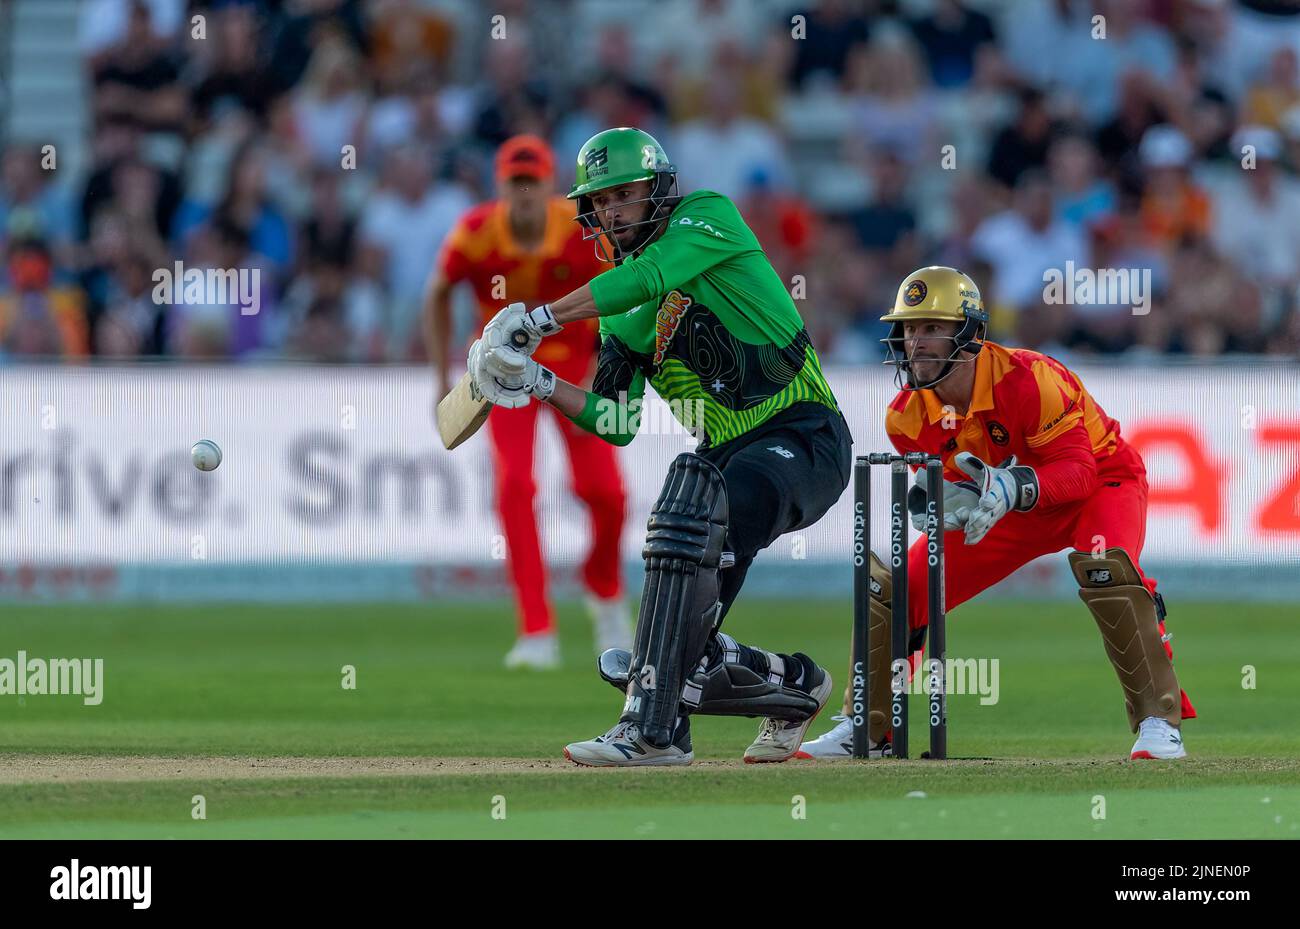 James Vince of Southern Brave batting in The Hundred Stock Photo